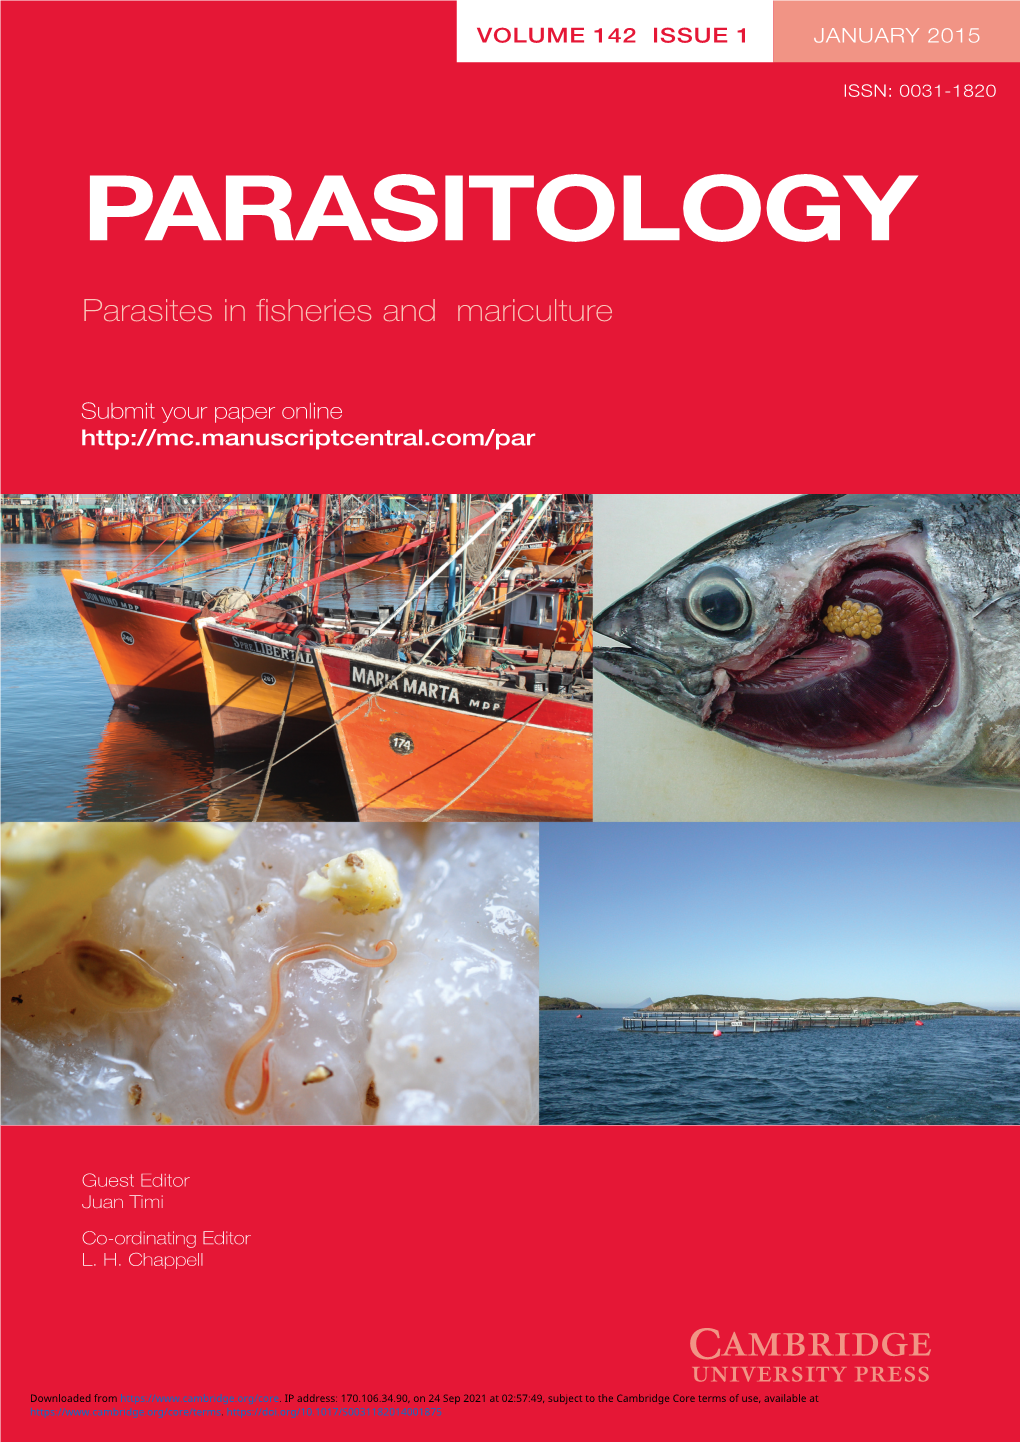 PARASITOLOGY Mariculture Sheries and in ﬁ Parasites Guest Editor Juan Timi Co-Ordinating Editor L